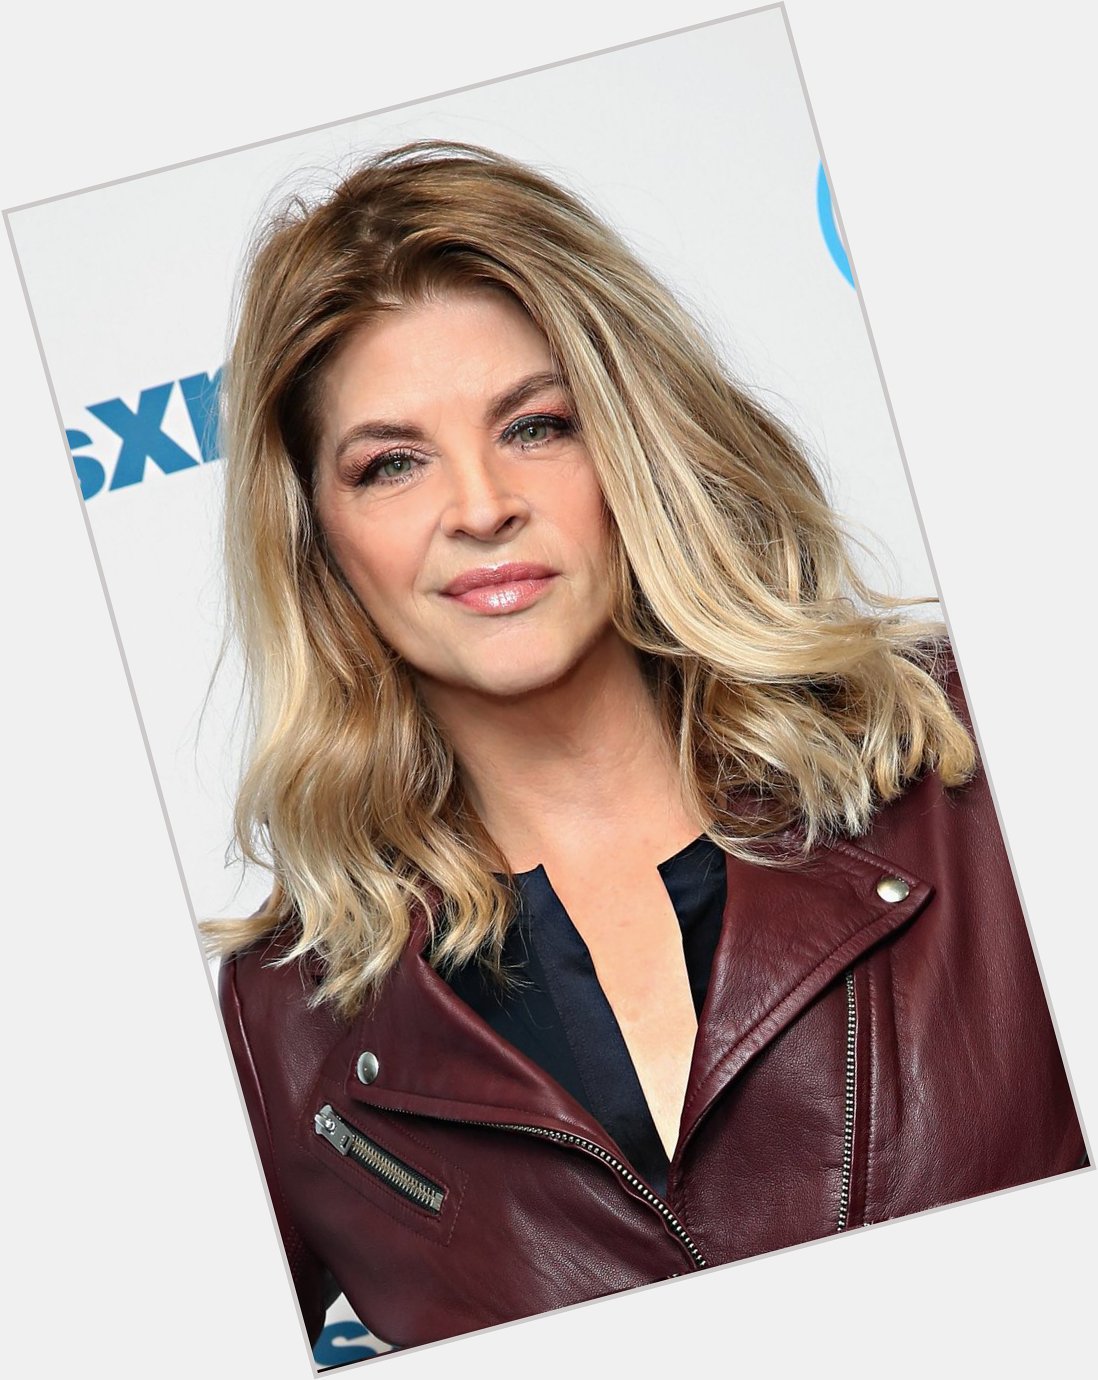 HAPPY BIRTHDAY TO THE LATE KIRSTIE ALLEY WHO WOULD\VE TURNED 72 TODAY. 